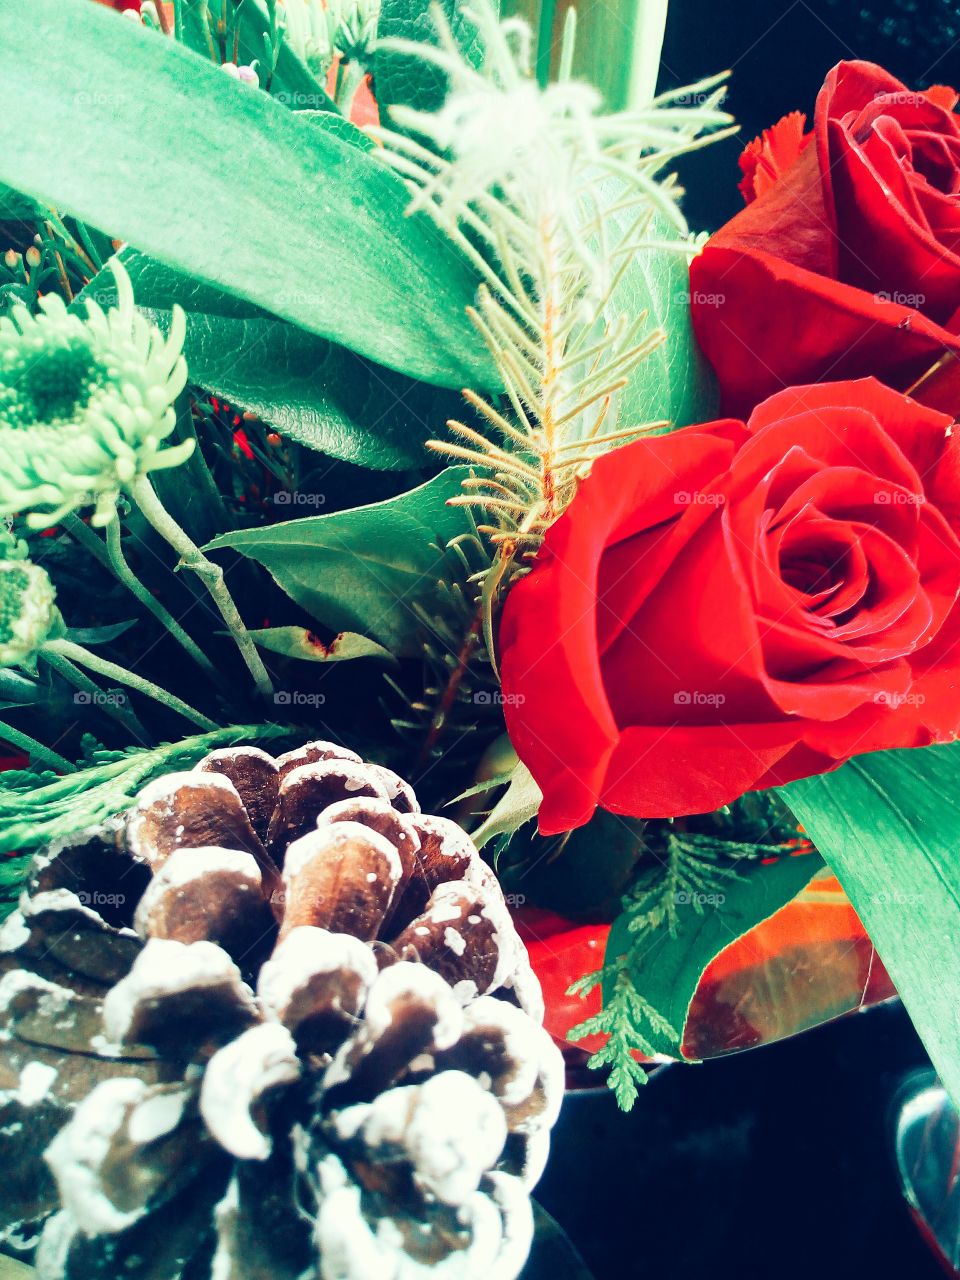 Roses and Pine cones, Christmas is arriving!